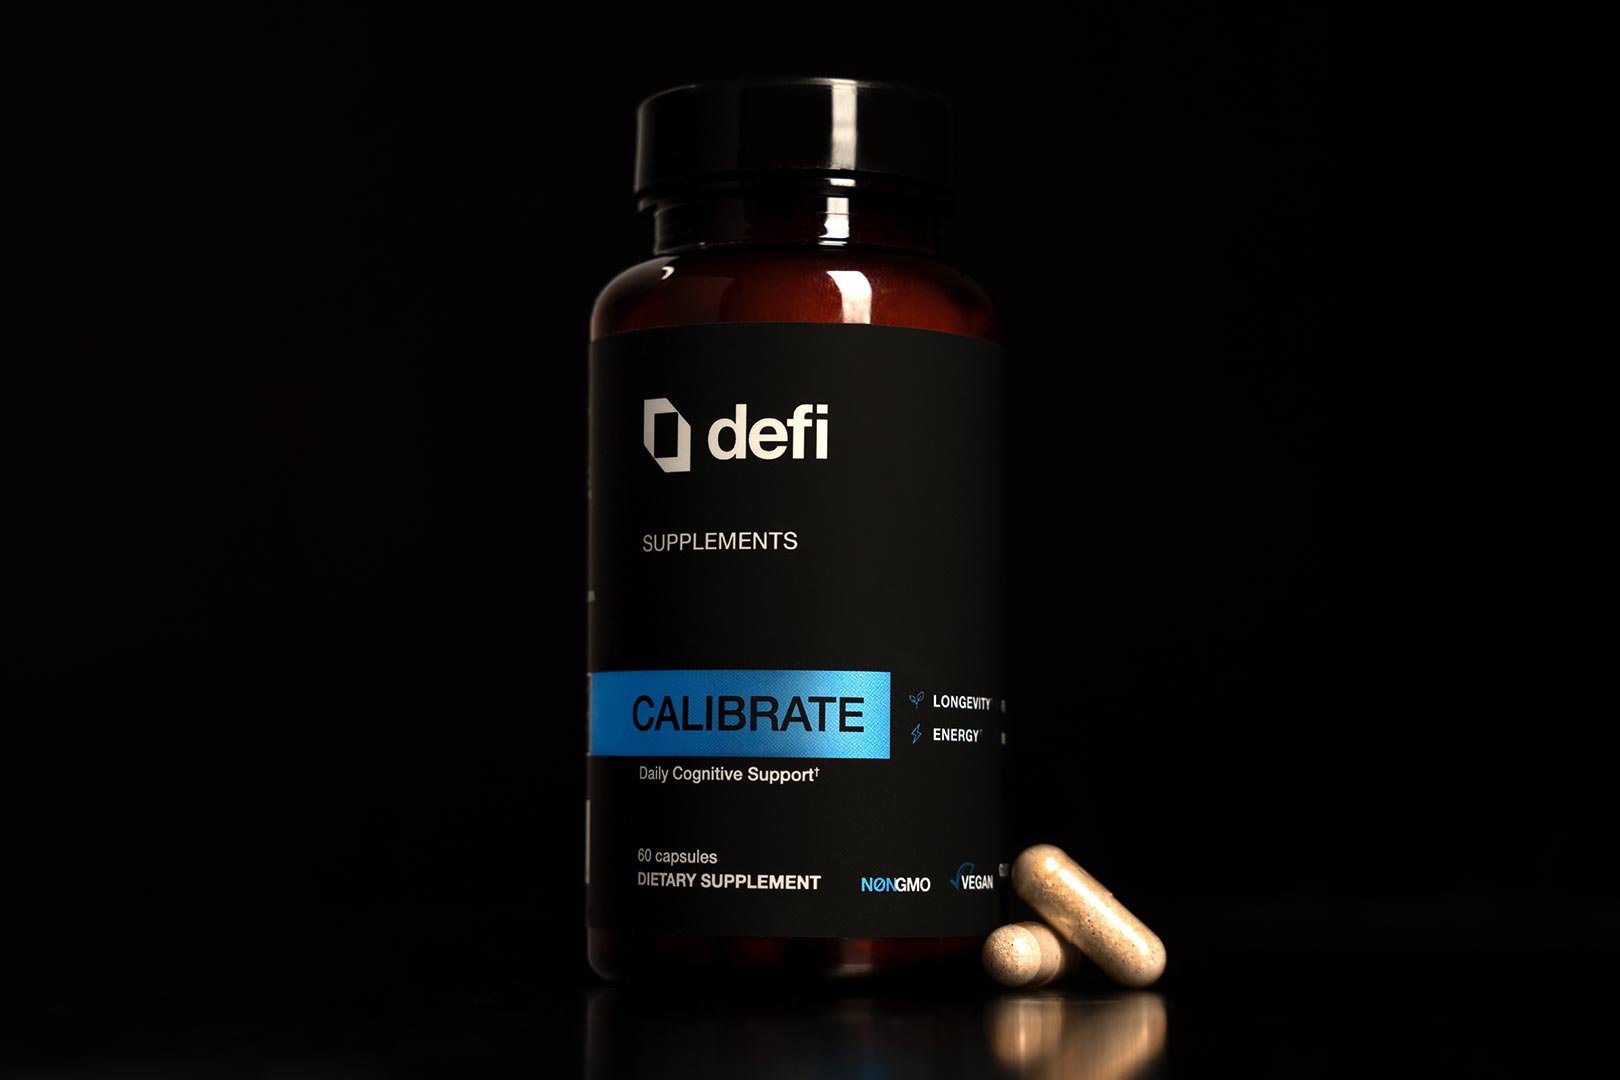 Introducing Defi Supplements And Calibrate